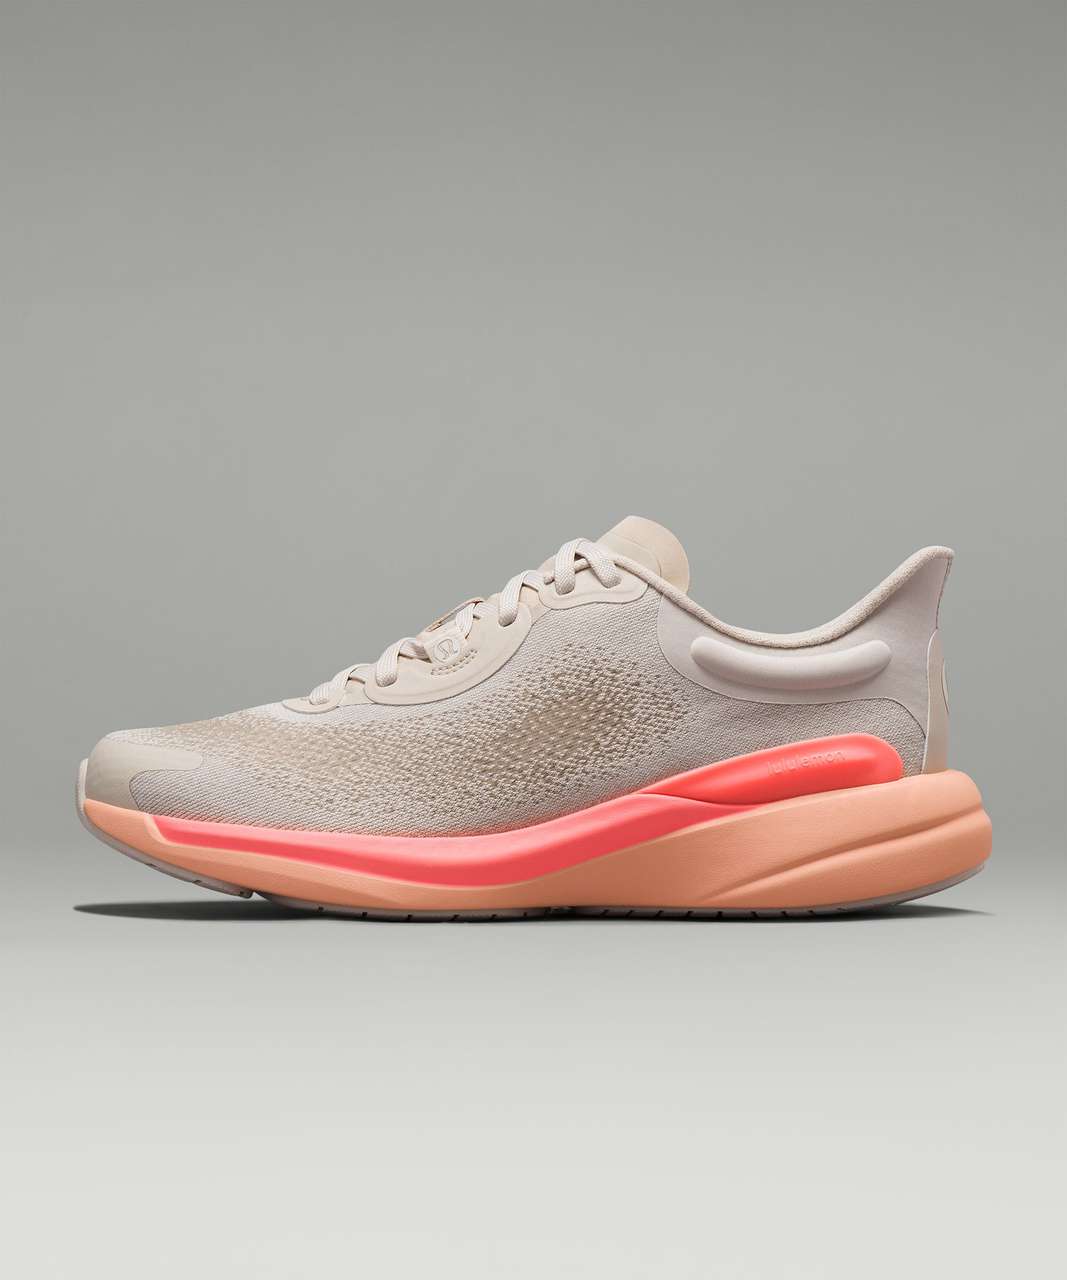 Lululemon Chargefeel 2 Low Womens Workout Shoe - Baked Clay / Peach Fuzz / Sunset